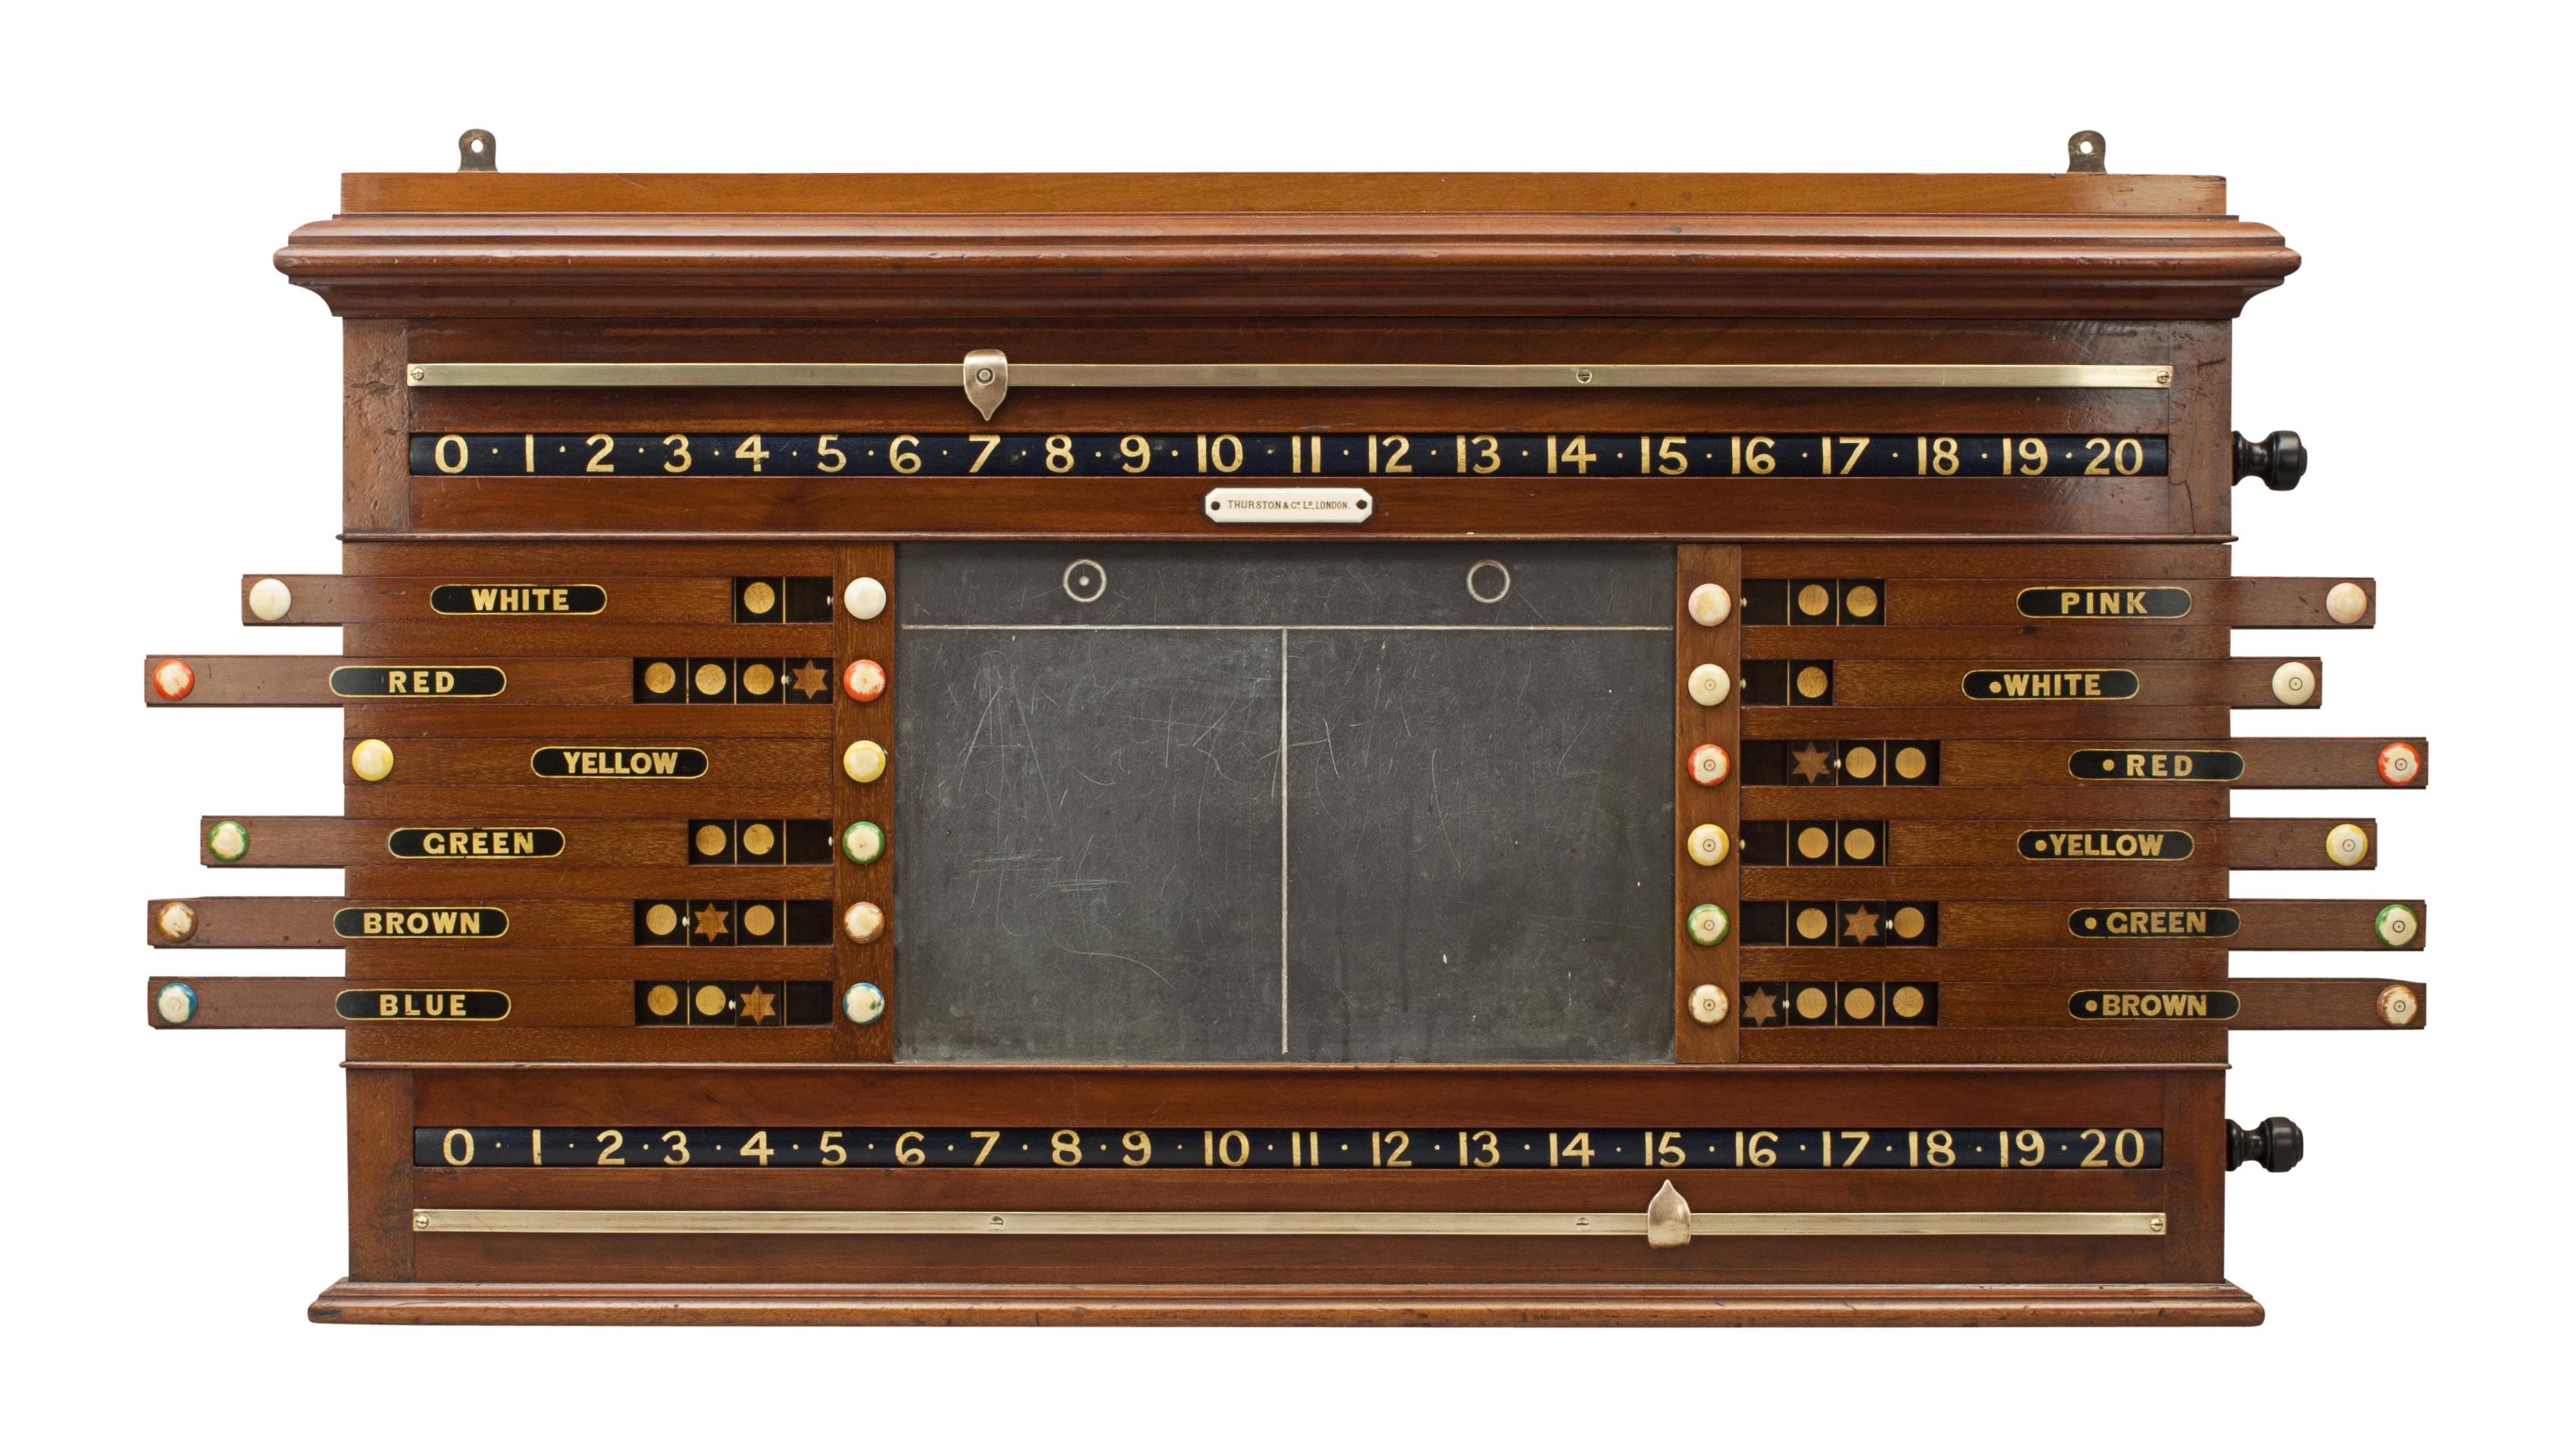 Thurston & Co. Ltd. Billiard, snooker, life pool scoreboard.
A nice combined billiards and life pool scoreboard made of mahogany by Thurston & Co. Ltd. The billiard scorer has two dark blue rollers with gold painted numbers, 0 to 20 / 20 to 40 / 40